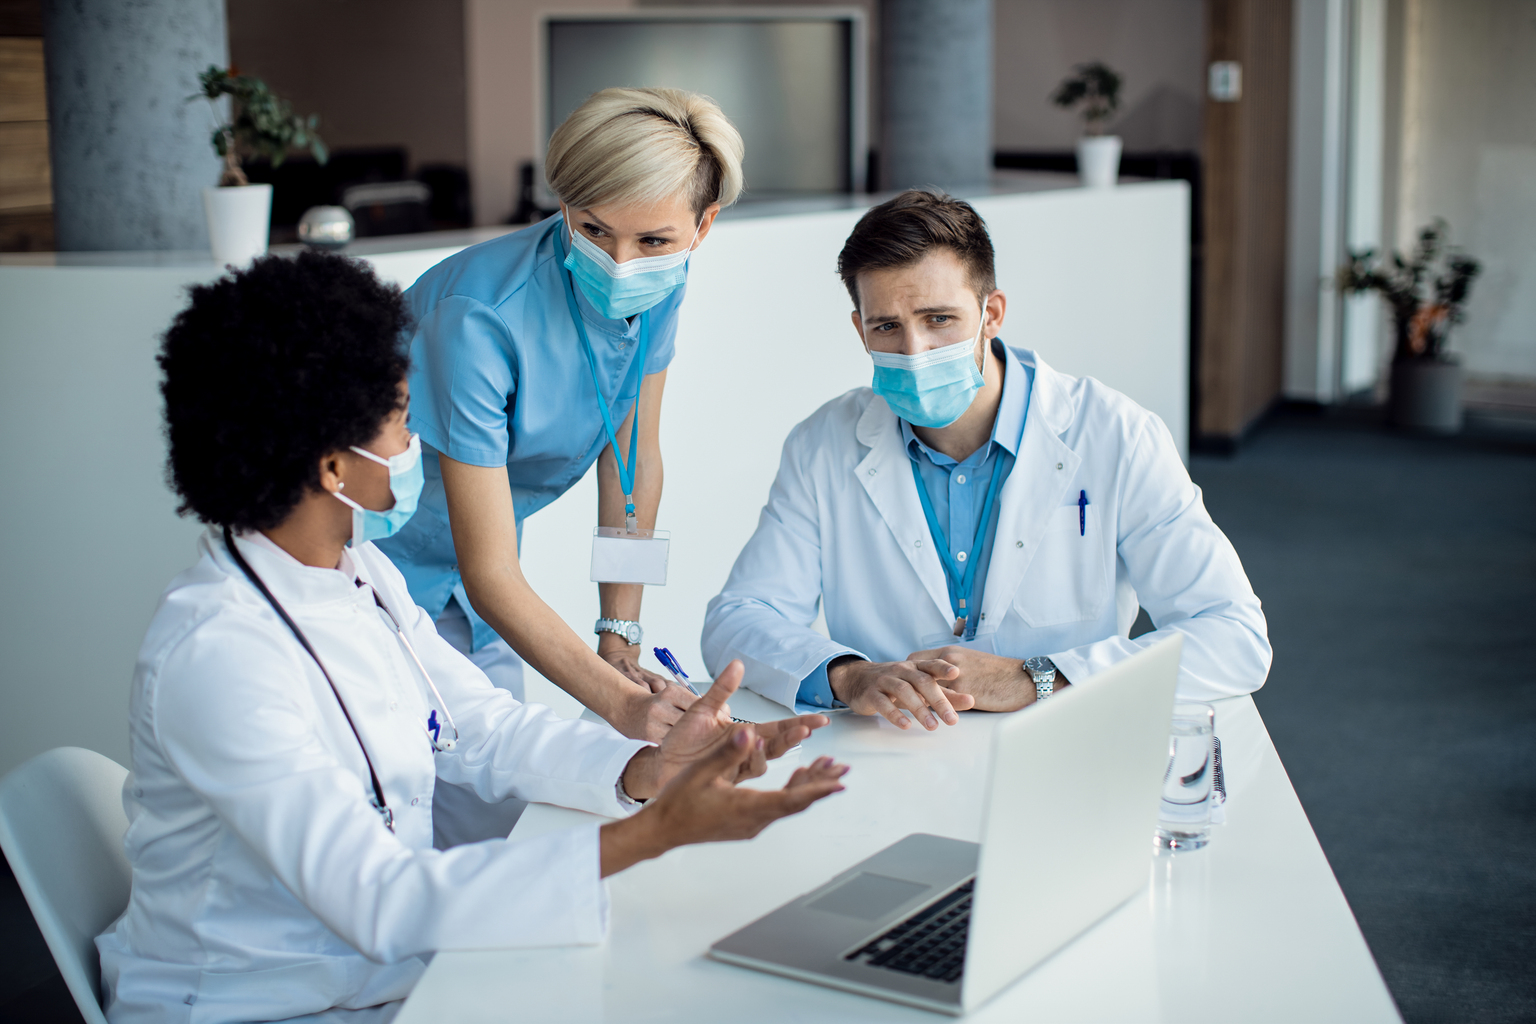 Group of mask wearing medical professionals talking while using laptop during a meeting in hospital